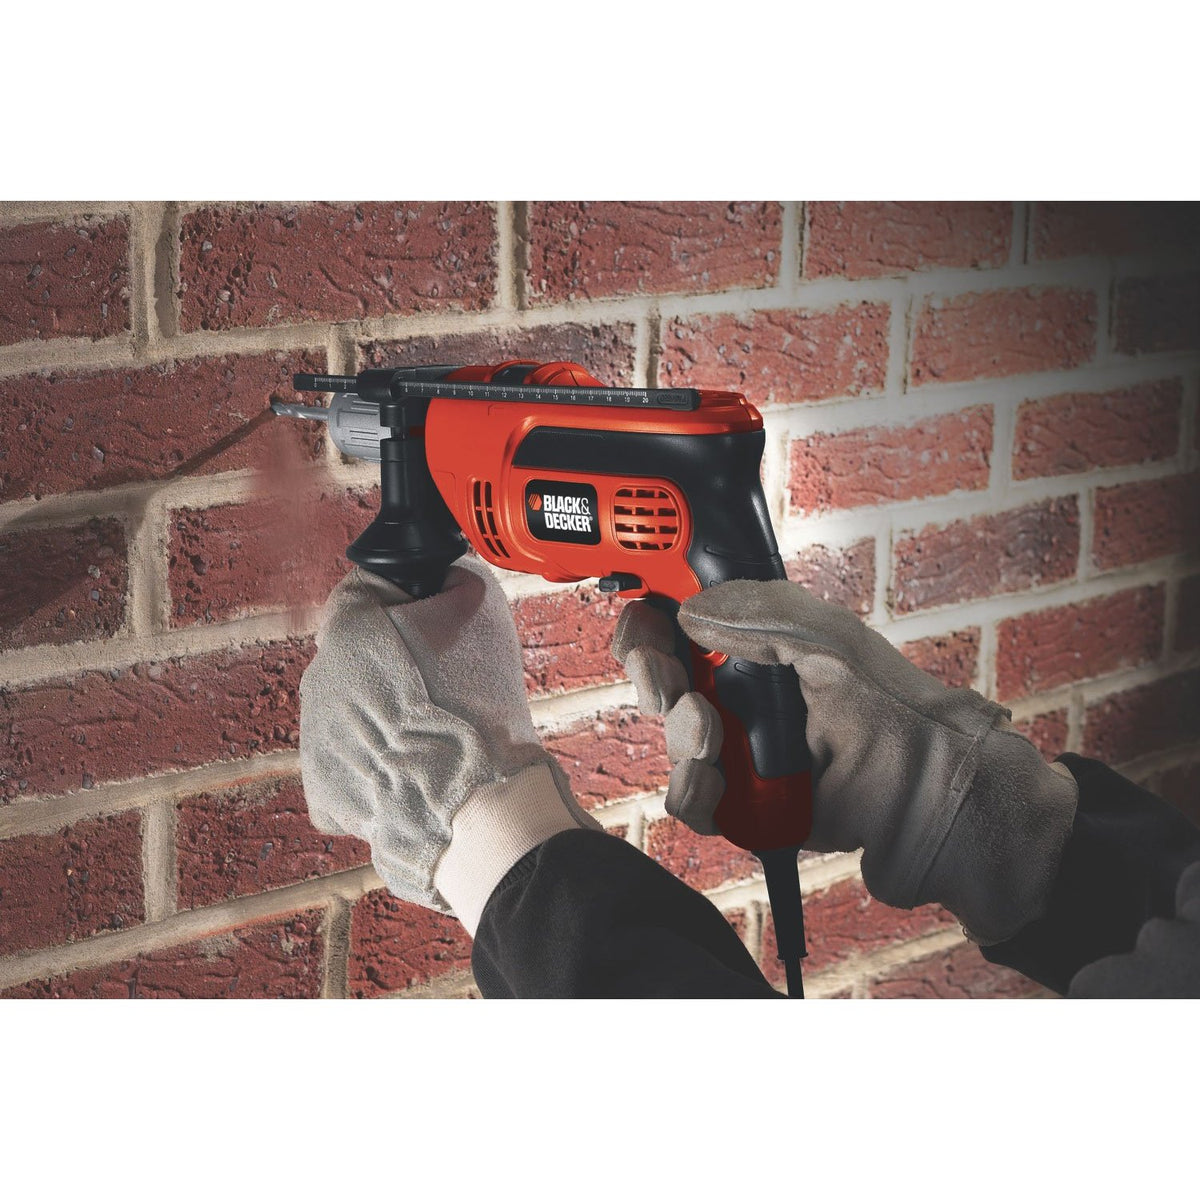 buy electric power hammer drills at cheap rate in bulk. wholesale & retail hand tool supplies store. home décor ideas, maintenance, repair replacement parts